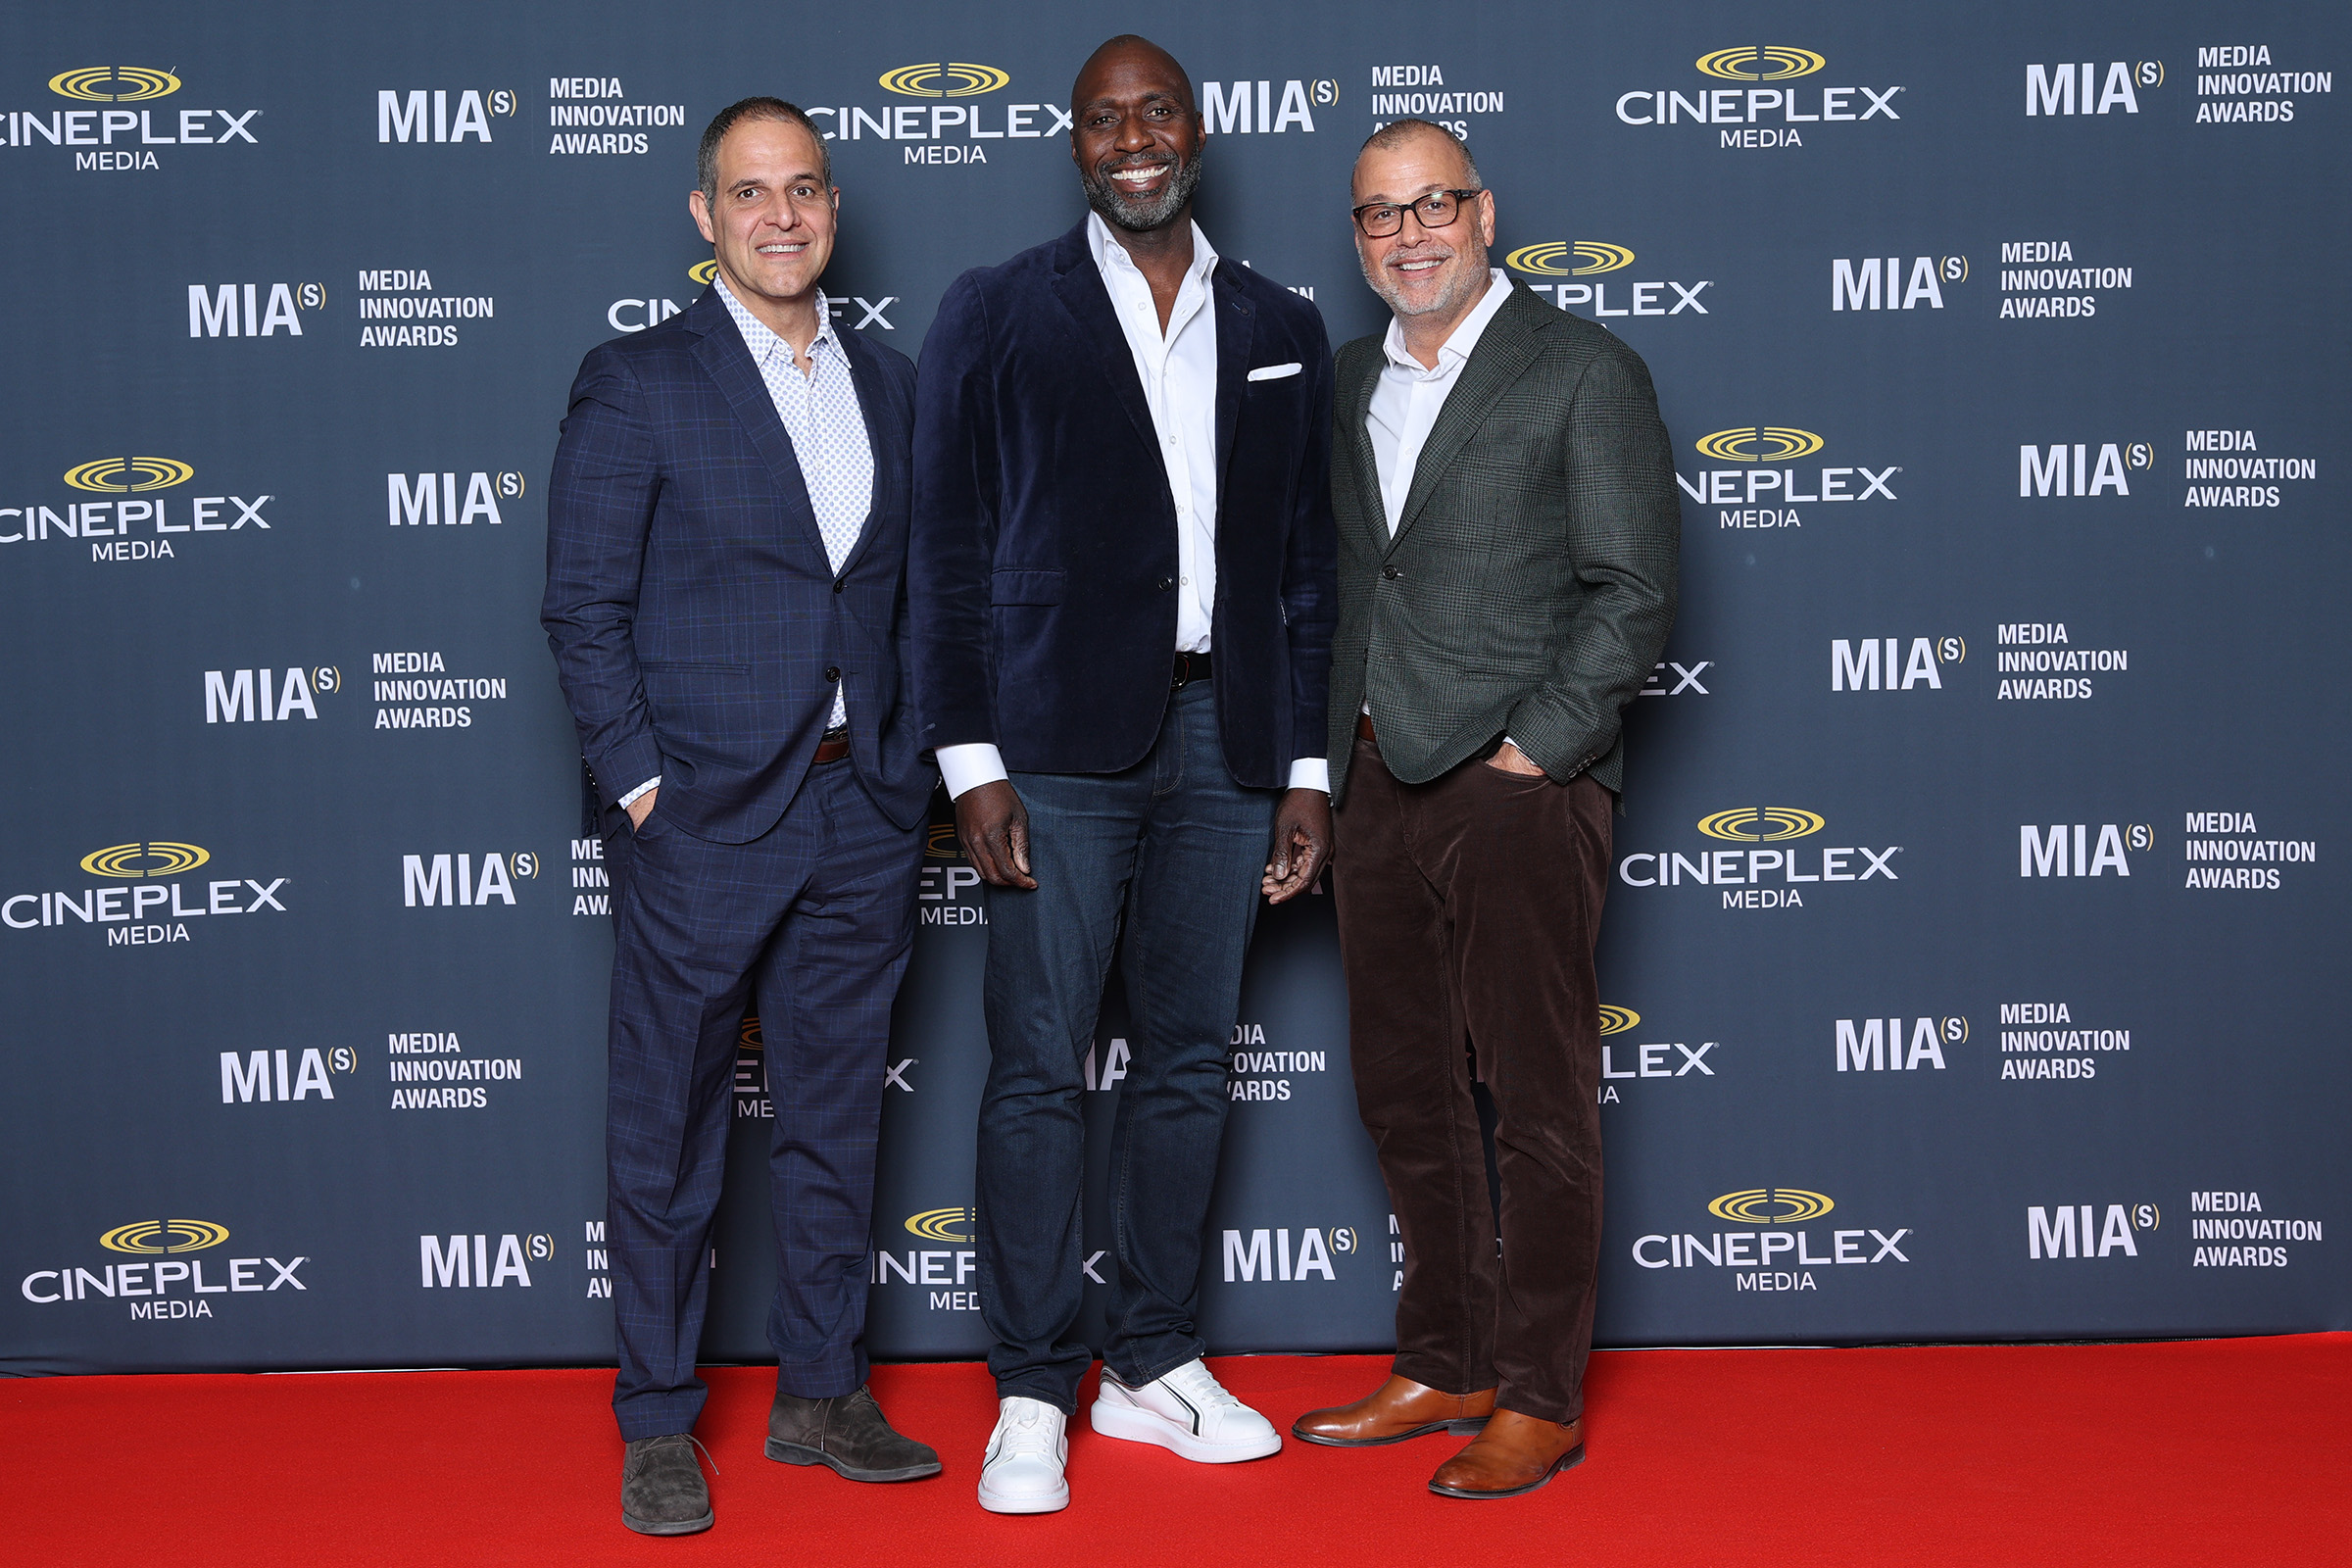 Three men posing for event photography on a red carpet.